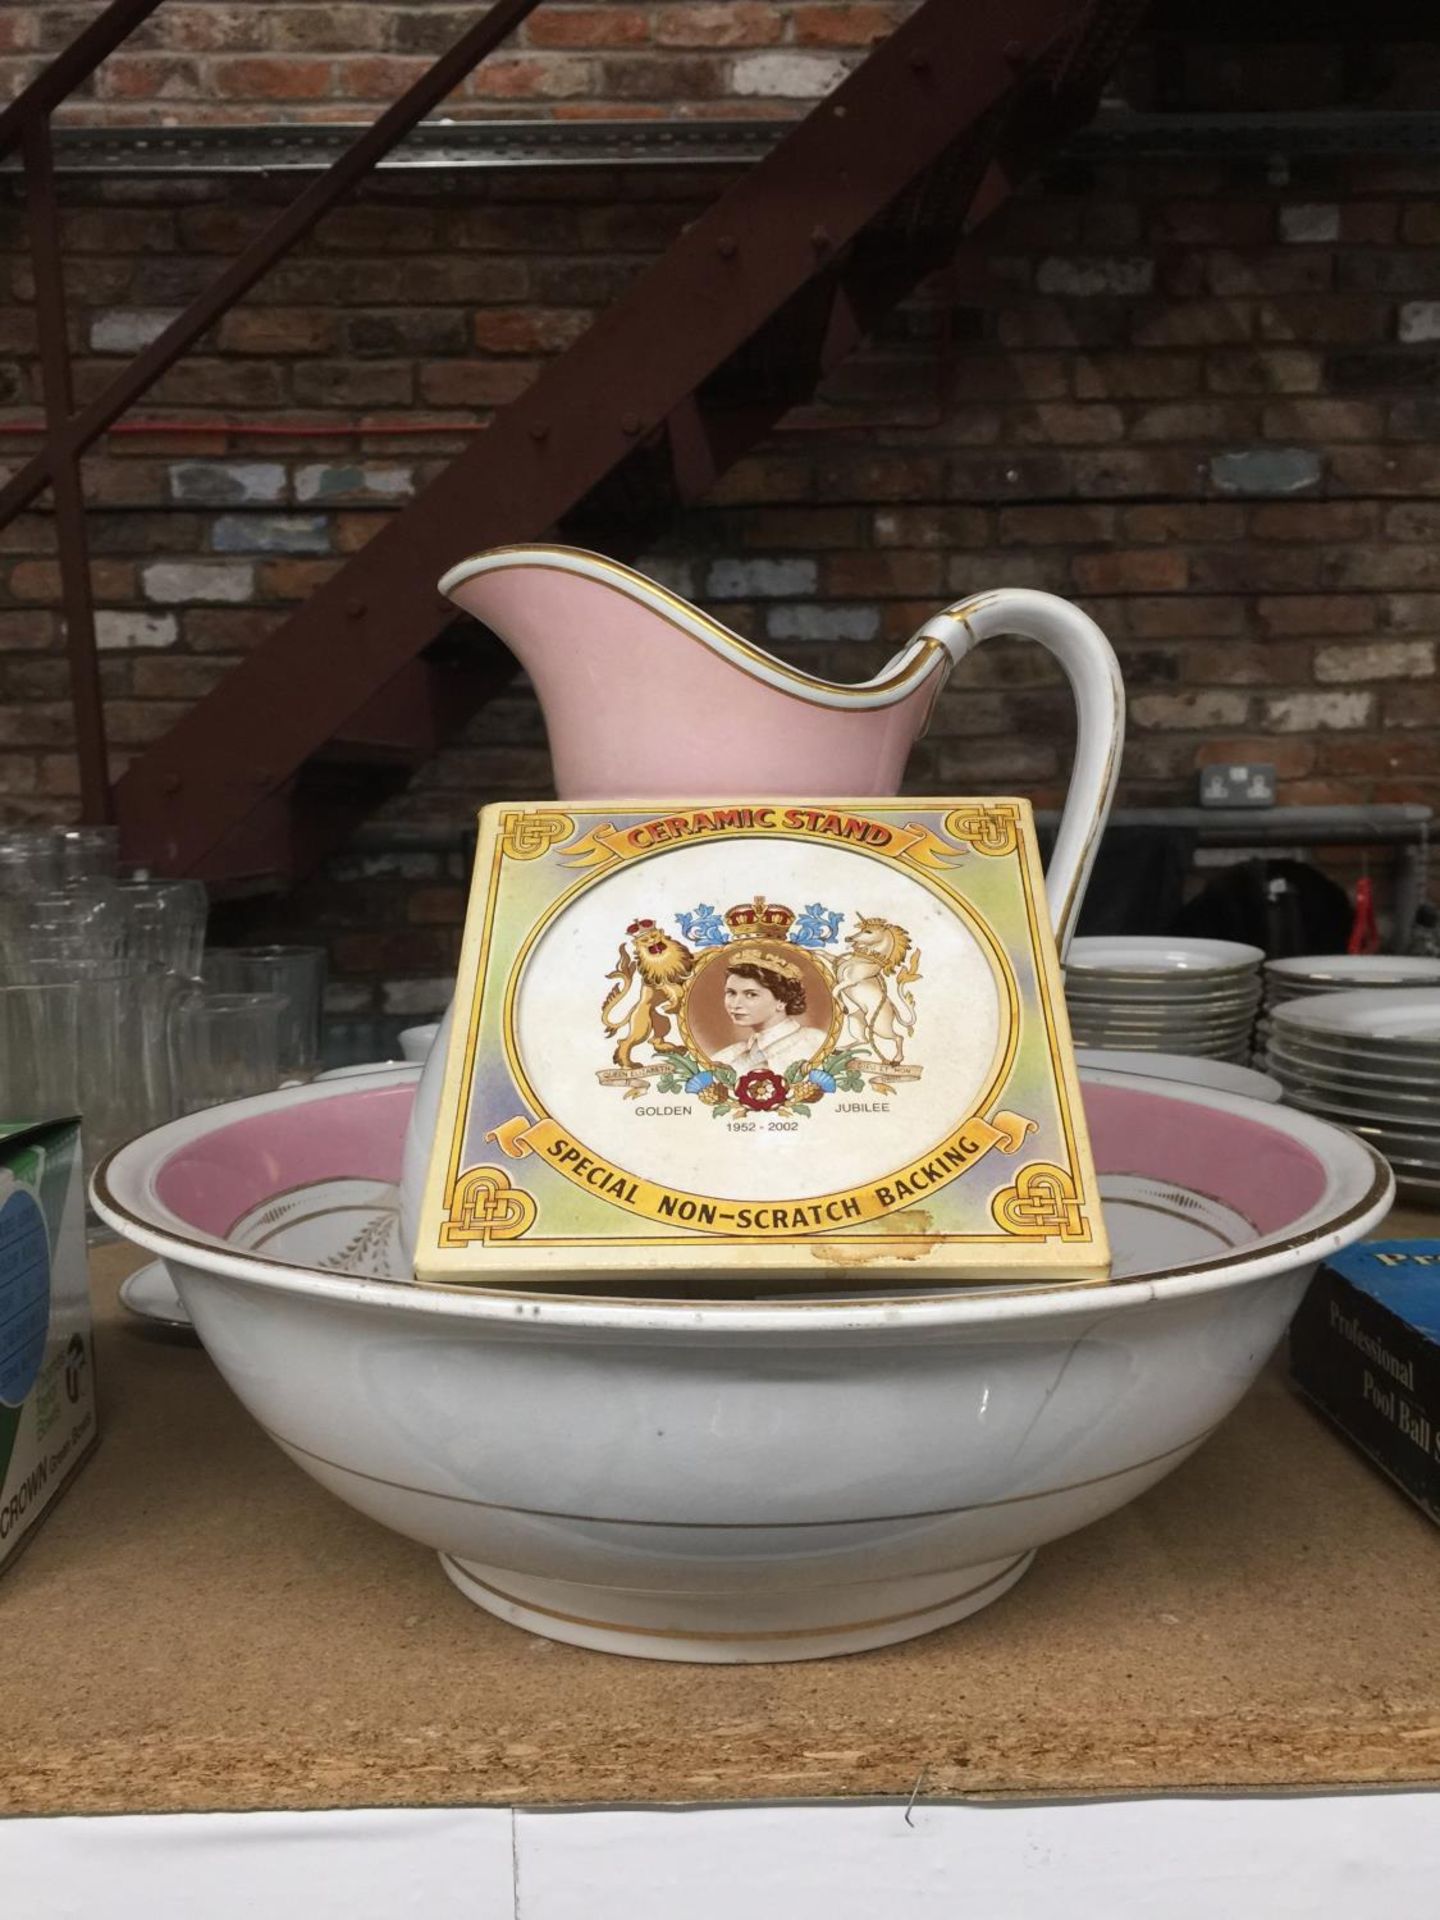 A LARGE WASHBOWL AND JUG - BOWL A/F PLUS A CERAMIC STAND COMMEMORATING THE QUEEN'S GOLDEN JUBILEE - Image 2 of 3